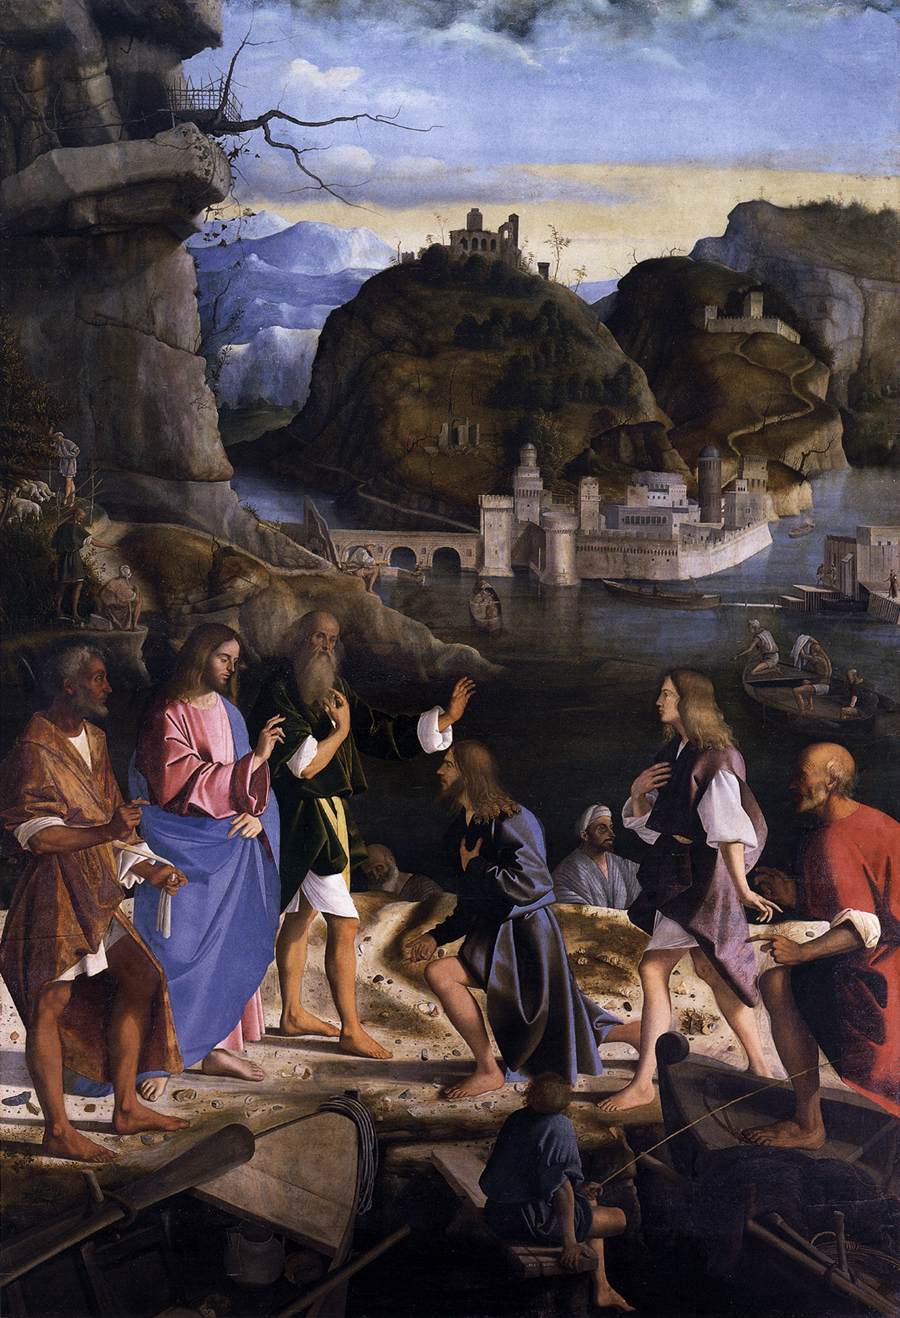 Marco Basaiti (1470/75 - 1530), “The calling of the sons of Zebedee”, oil on canvas, Venice, Gallerie dell’Accademia